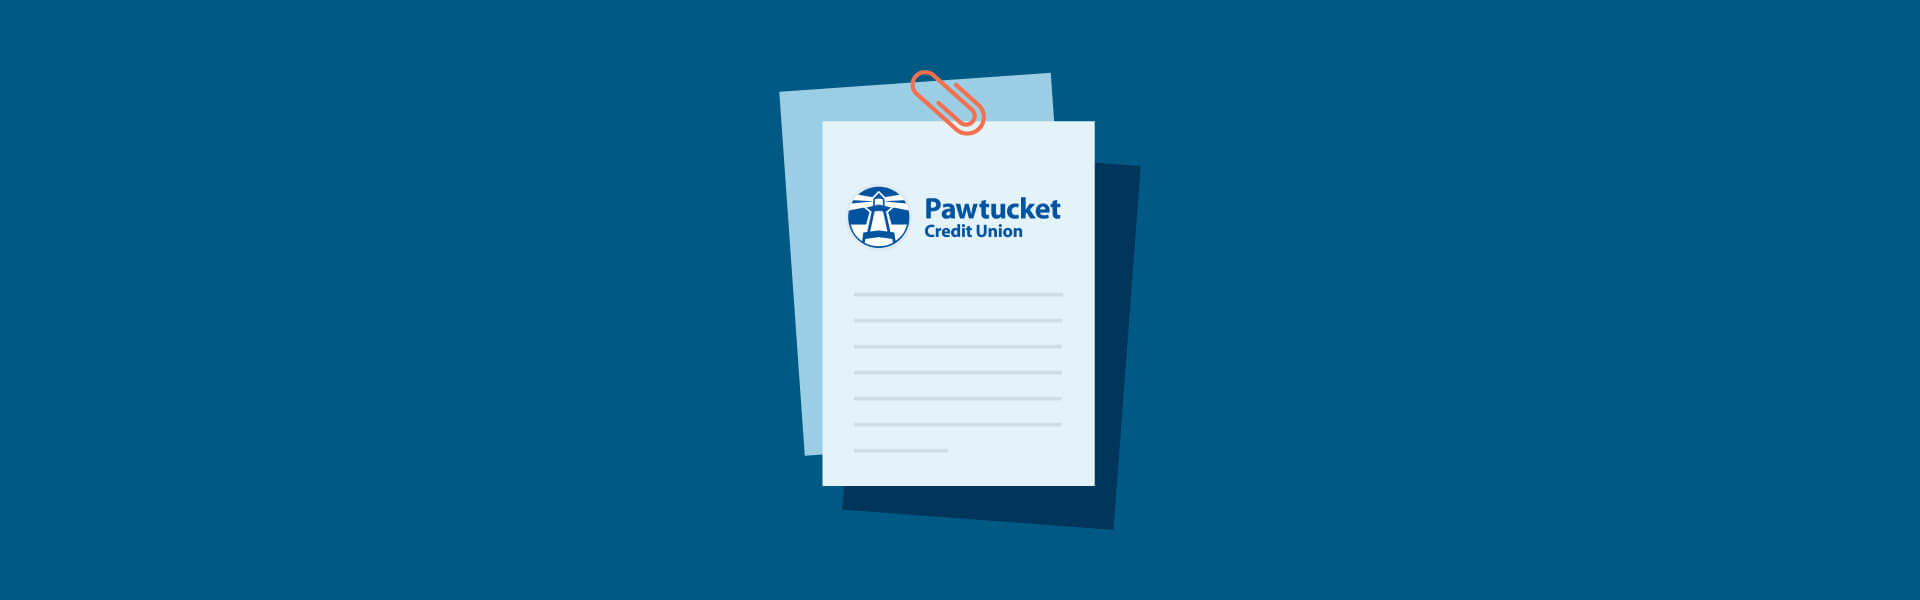 pawtucket credit union easy solutjons detect safe browsing